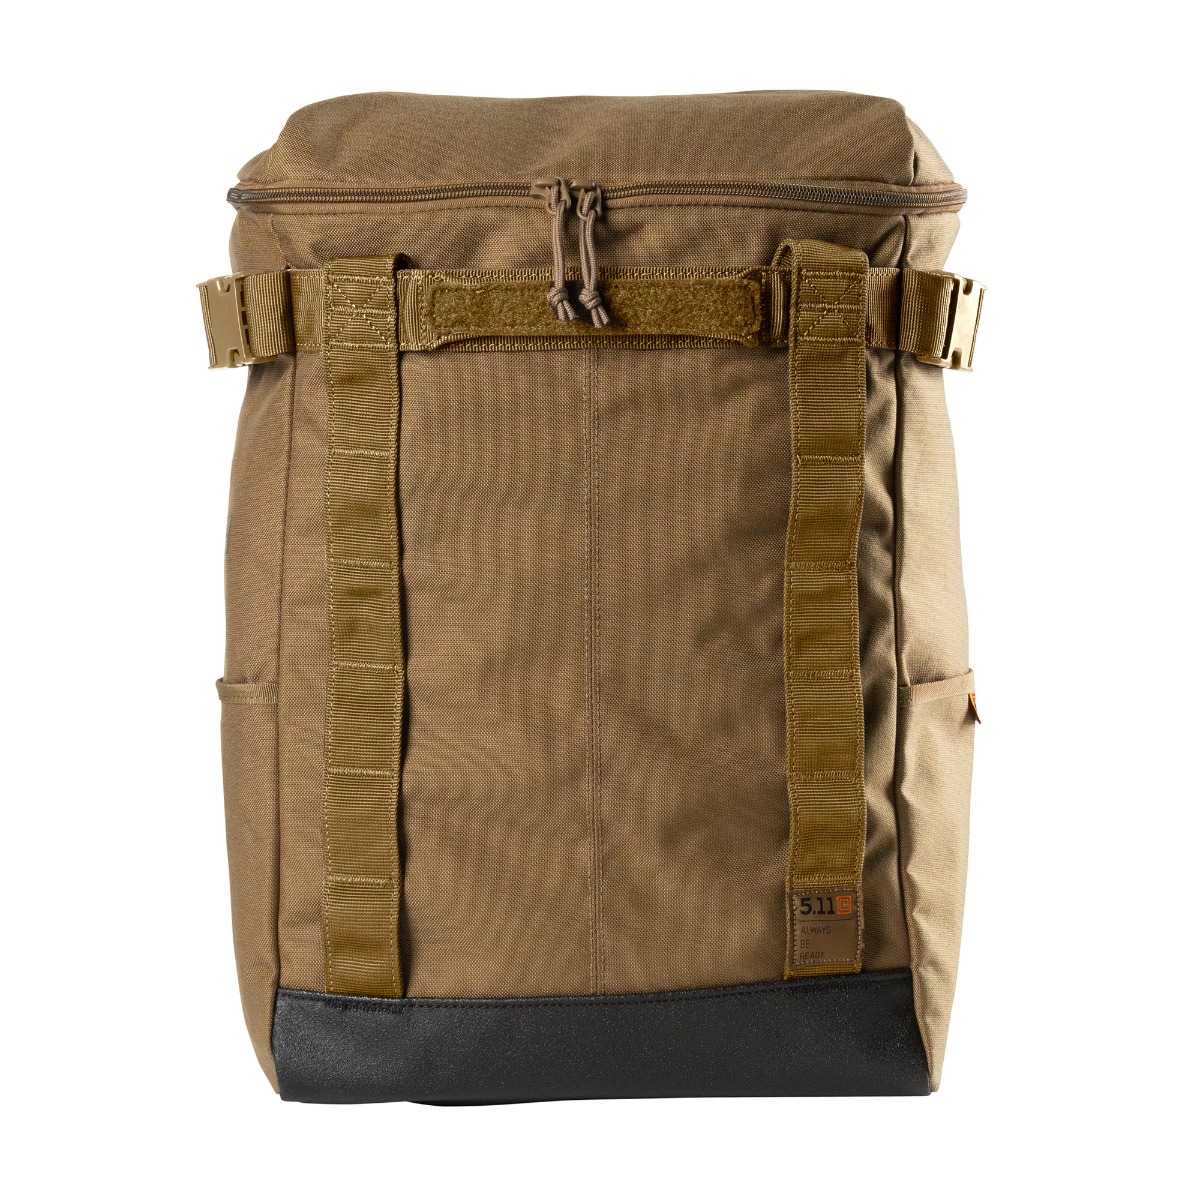 Balo 5.11 Tactical LOAD READY HAUL PACK 35L